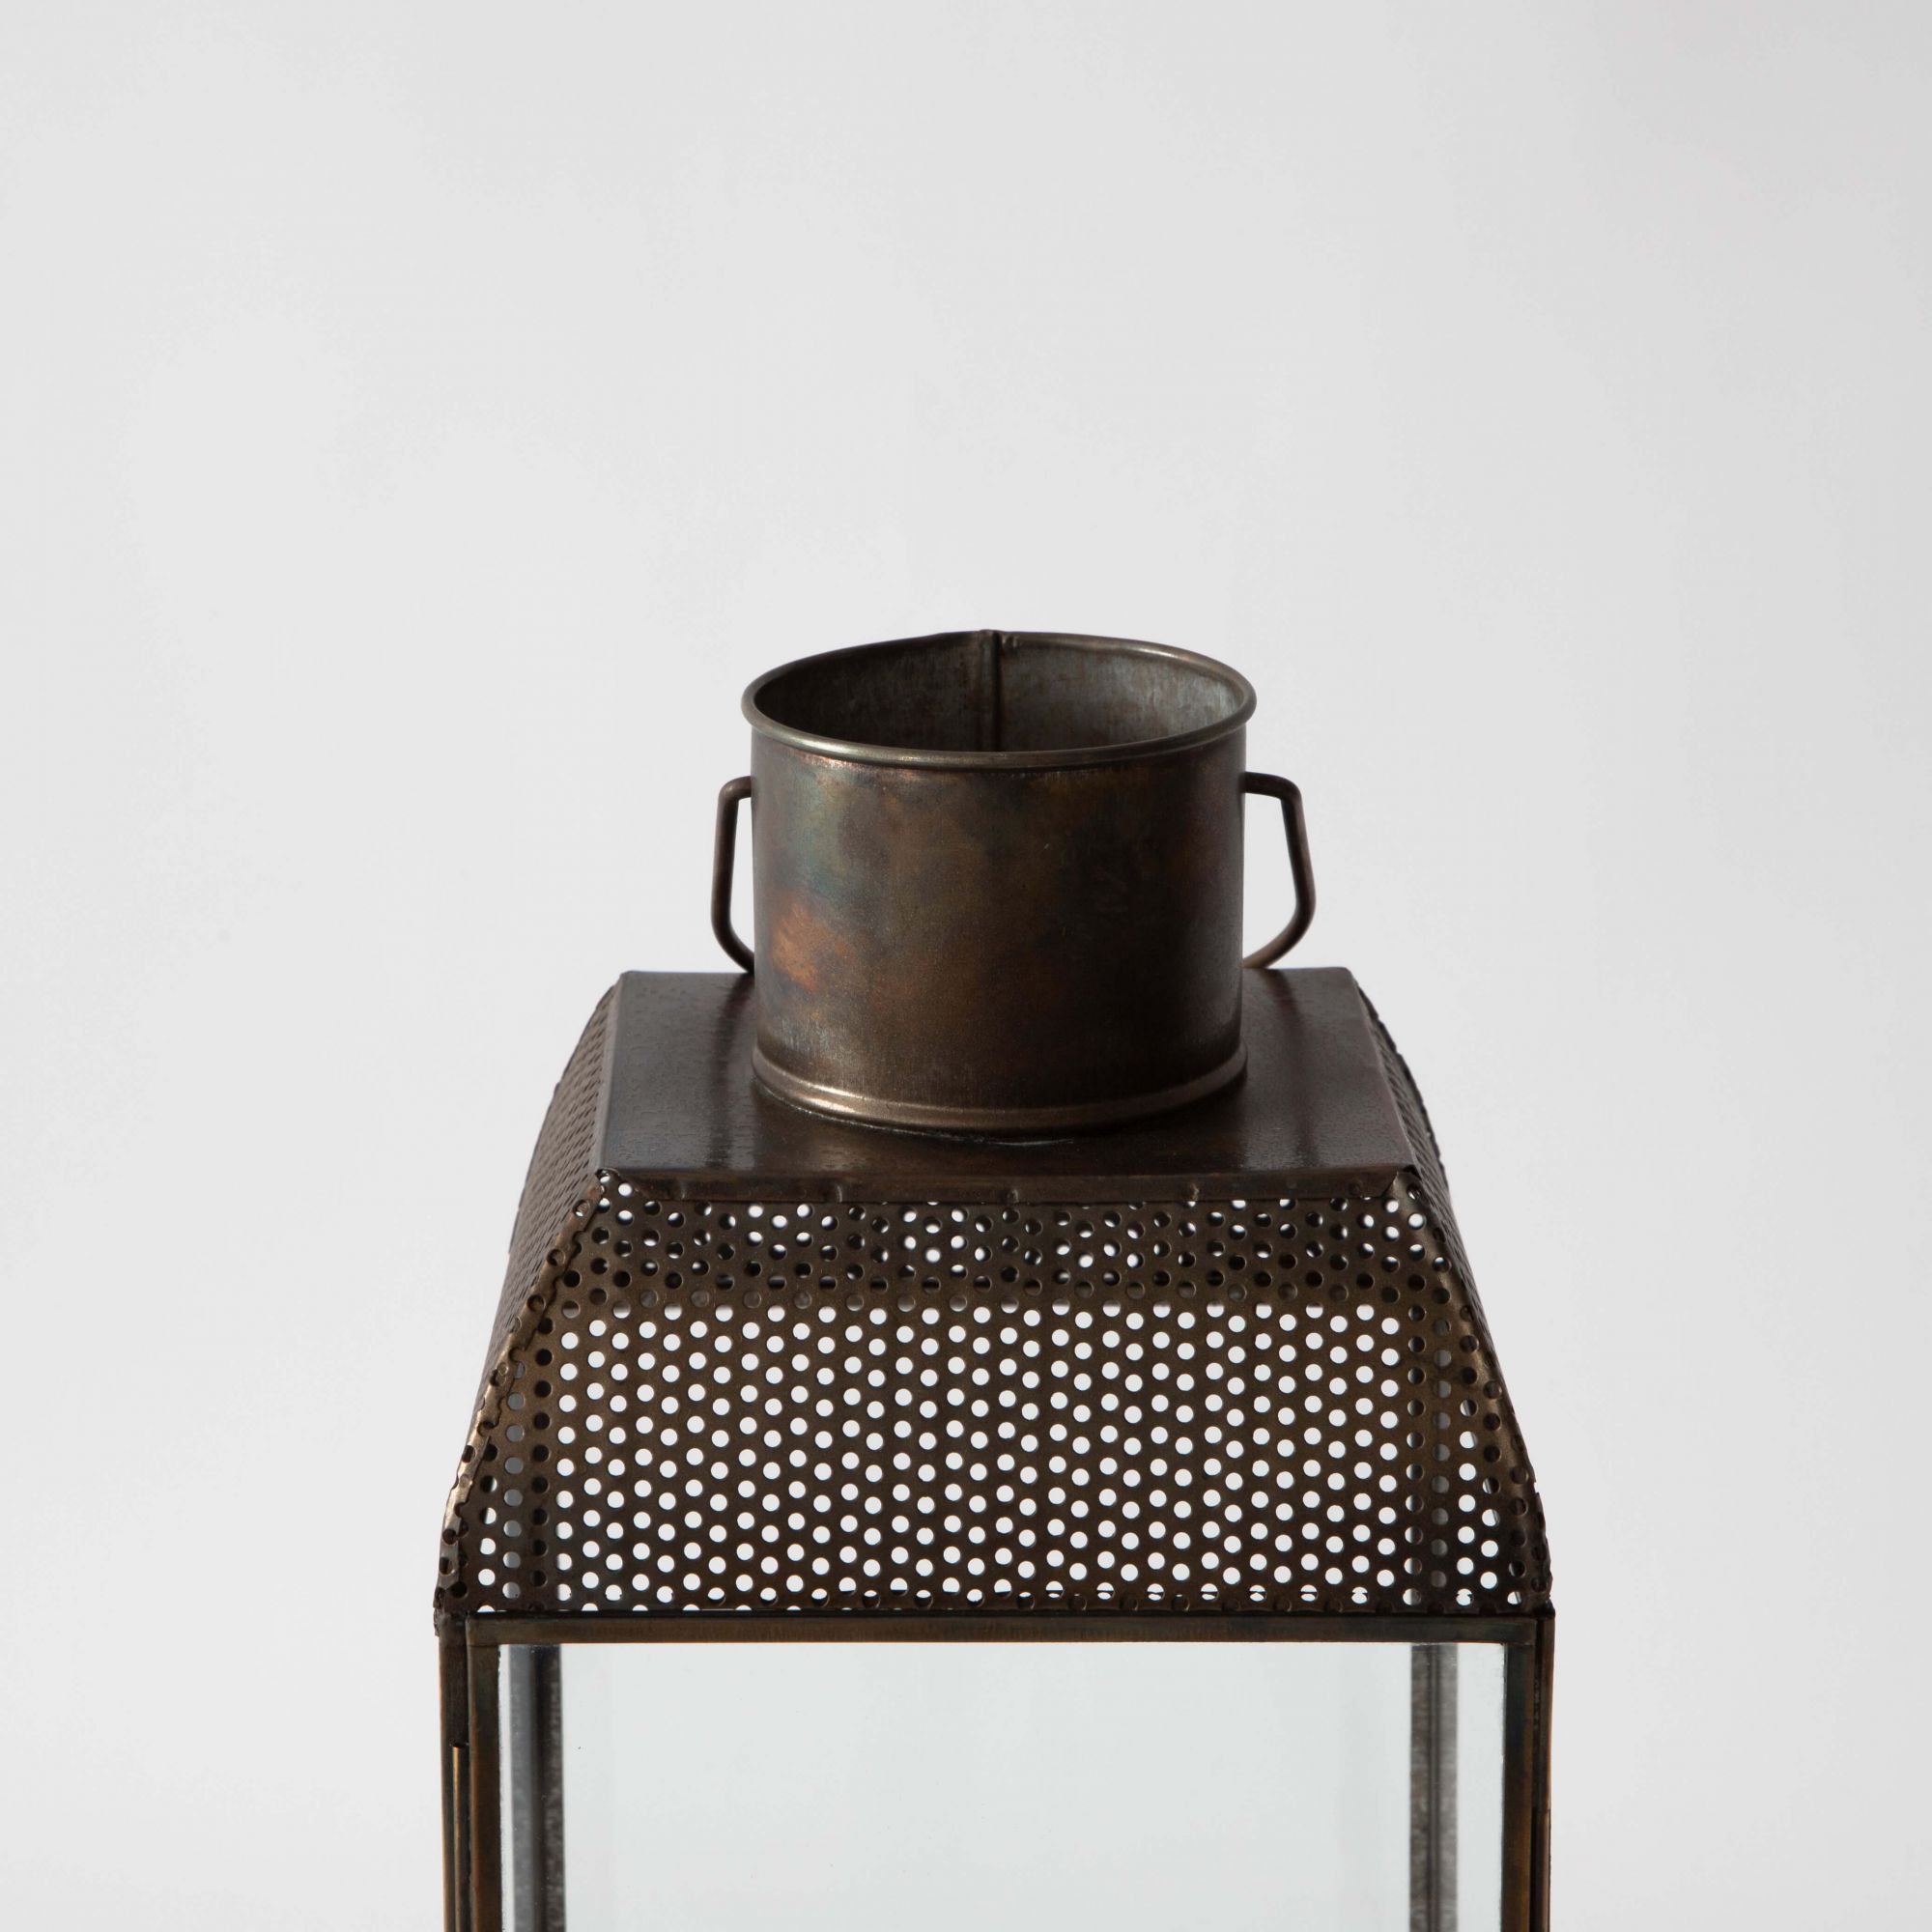 Norman Mesh Lantern Glass Candle Holder - Aged Antique Finish